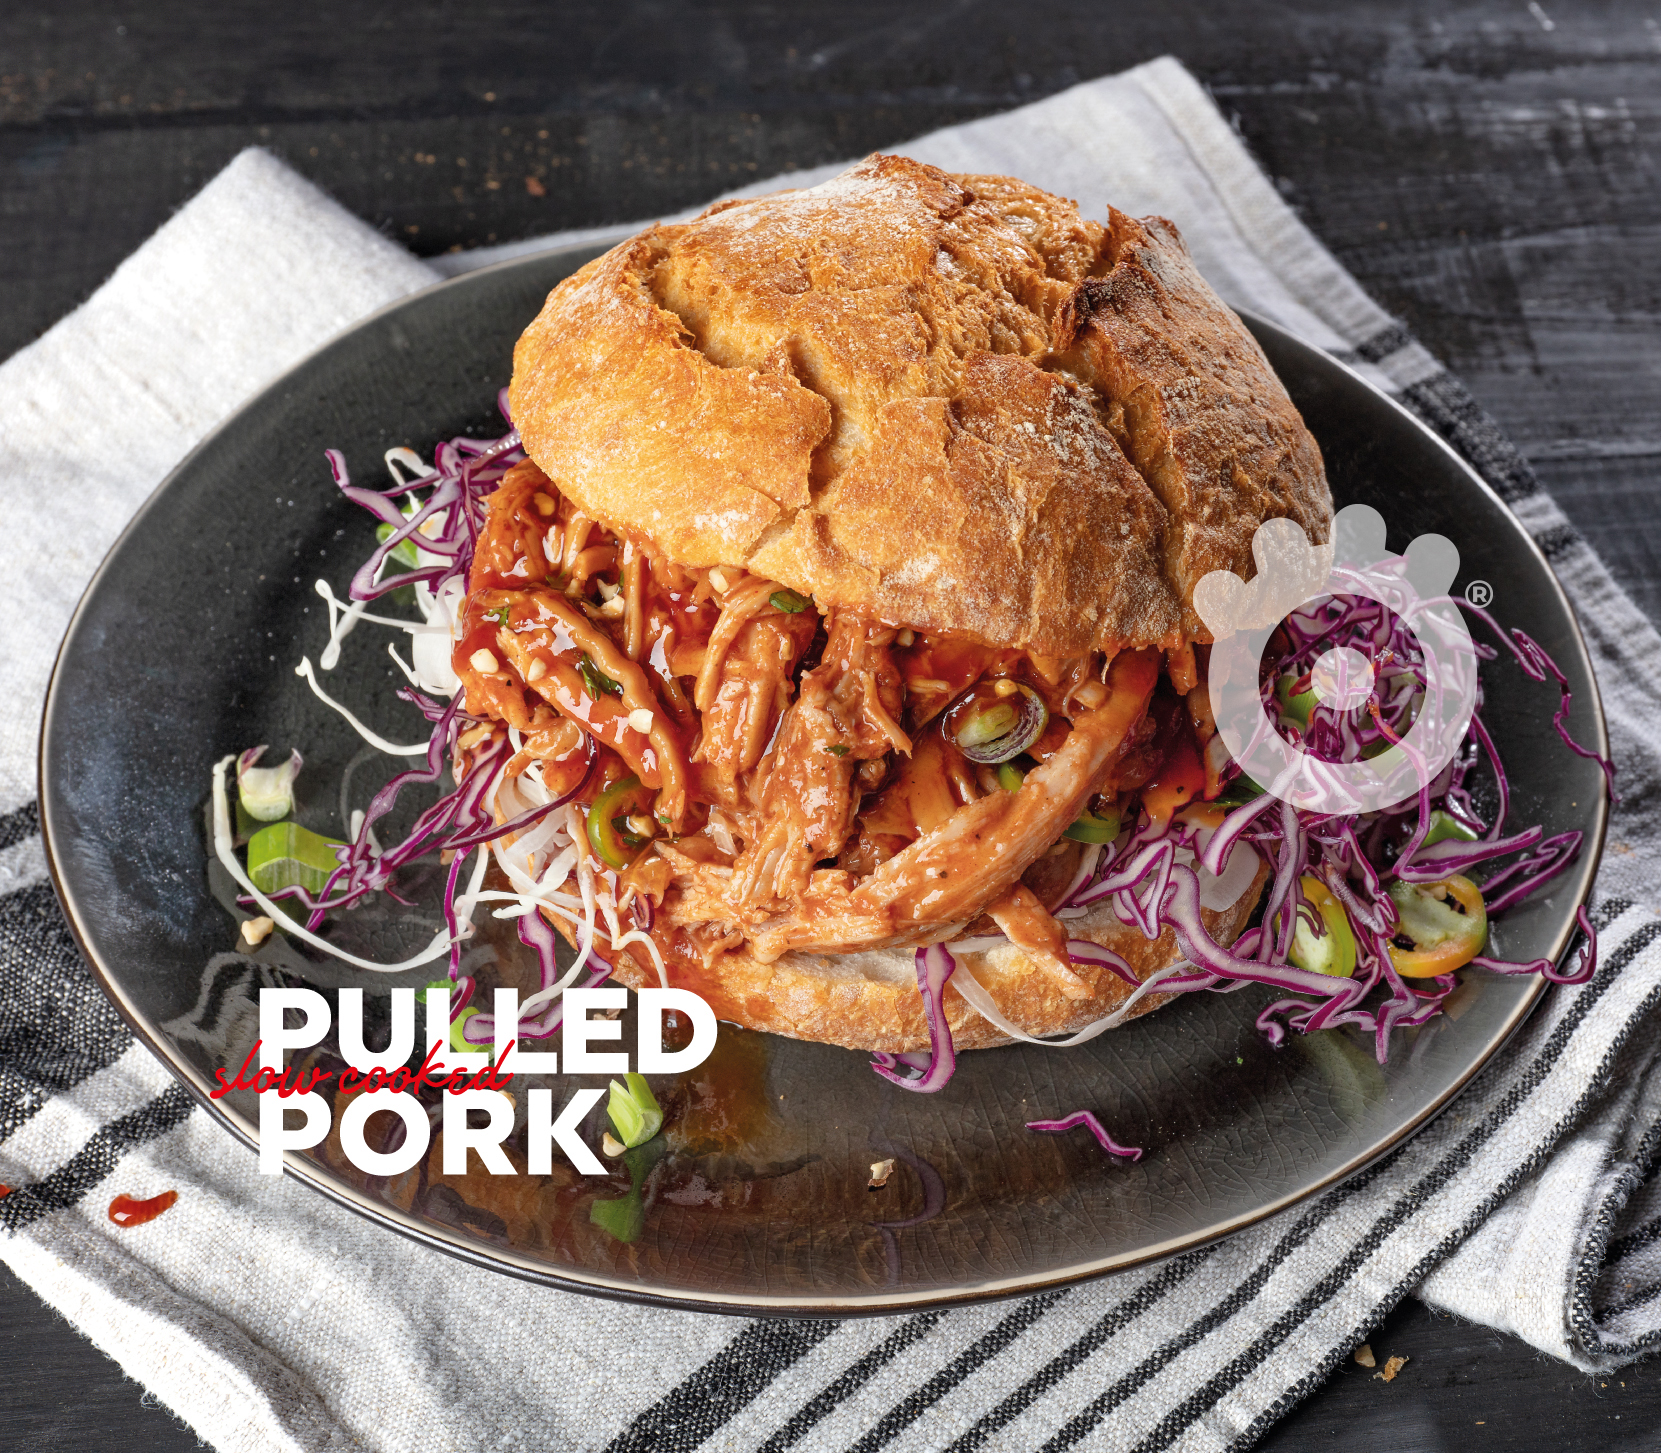 Pulled Pork - Food photography